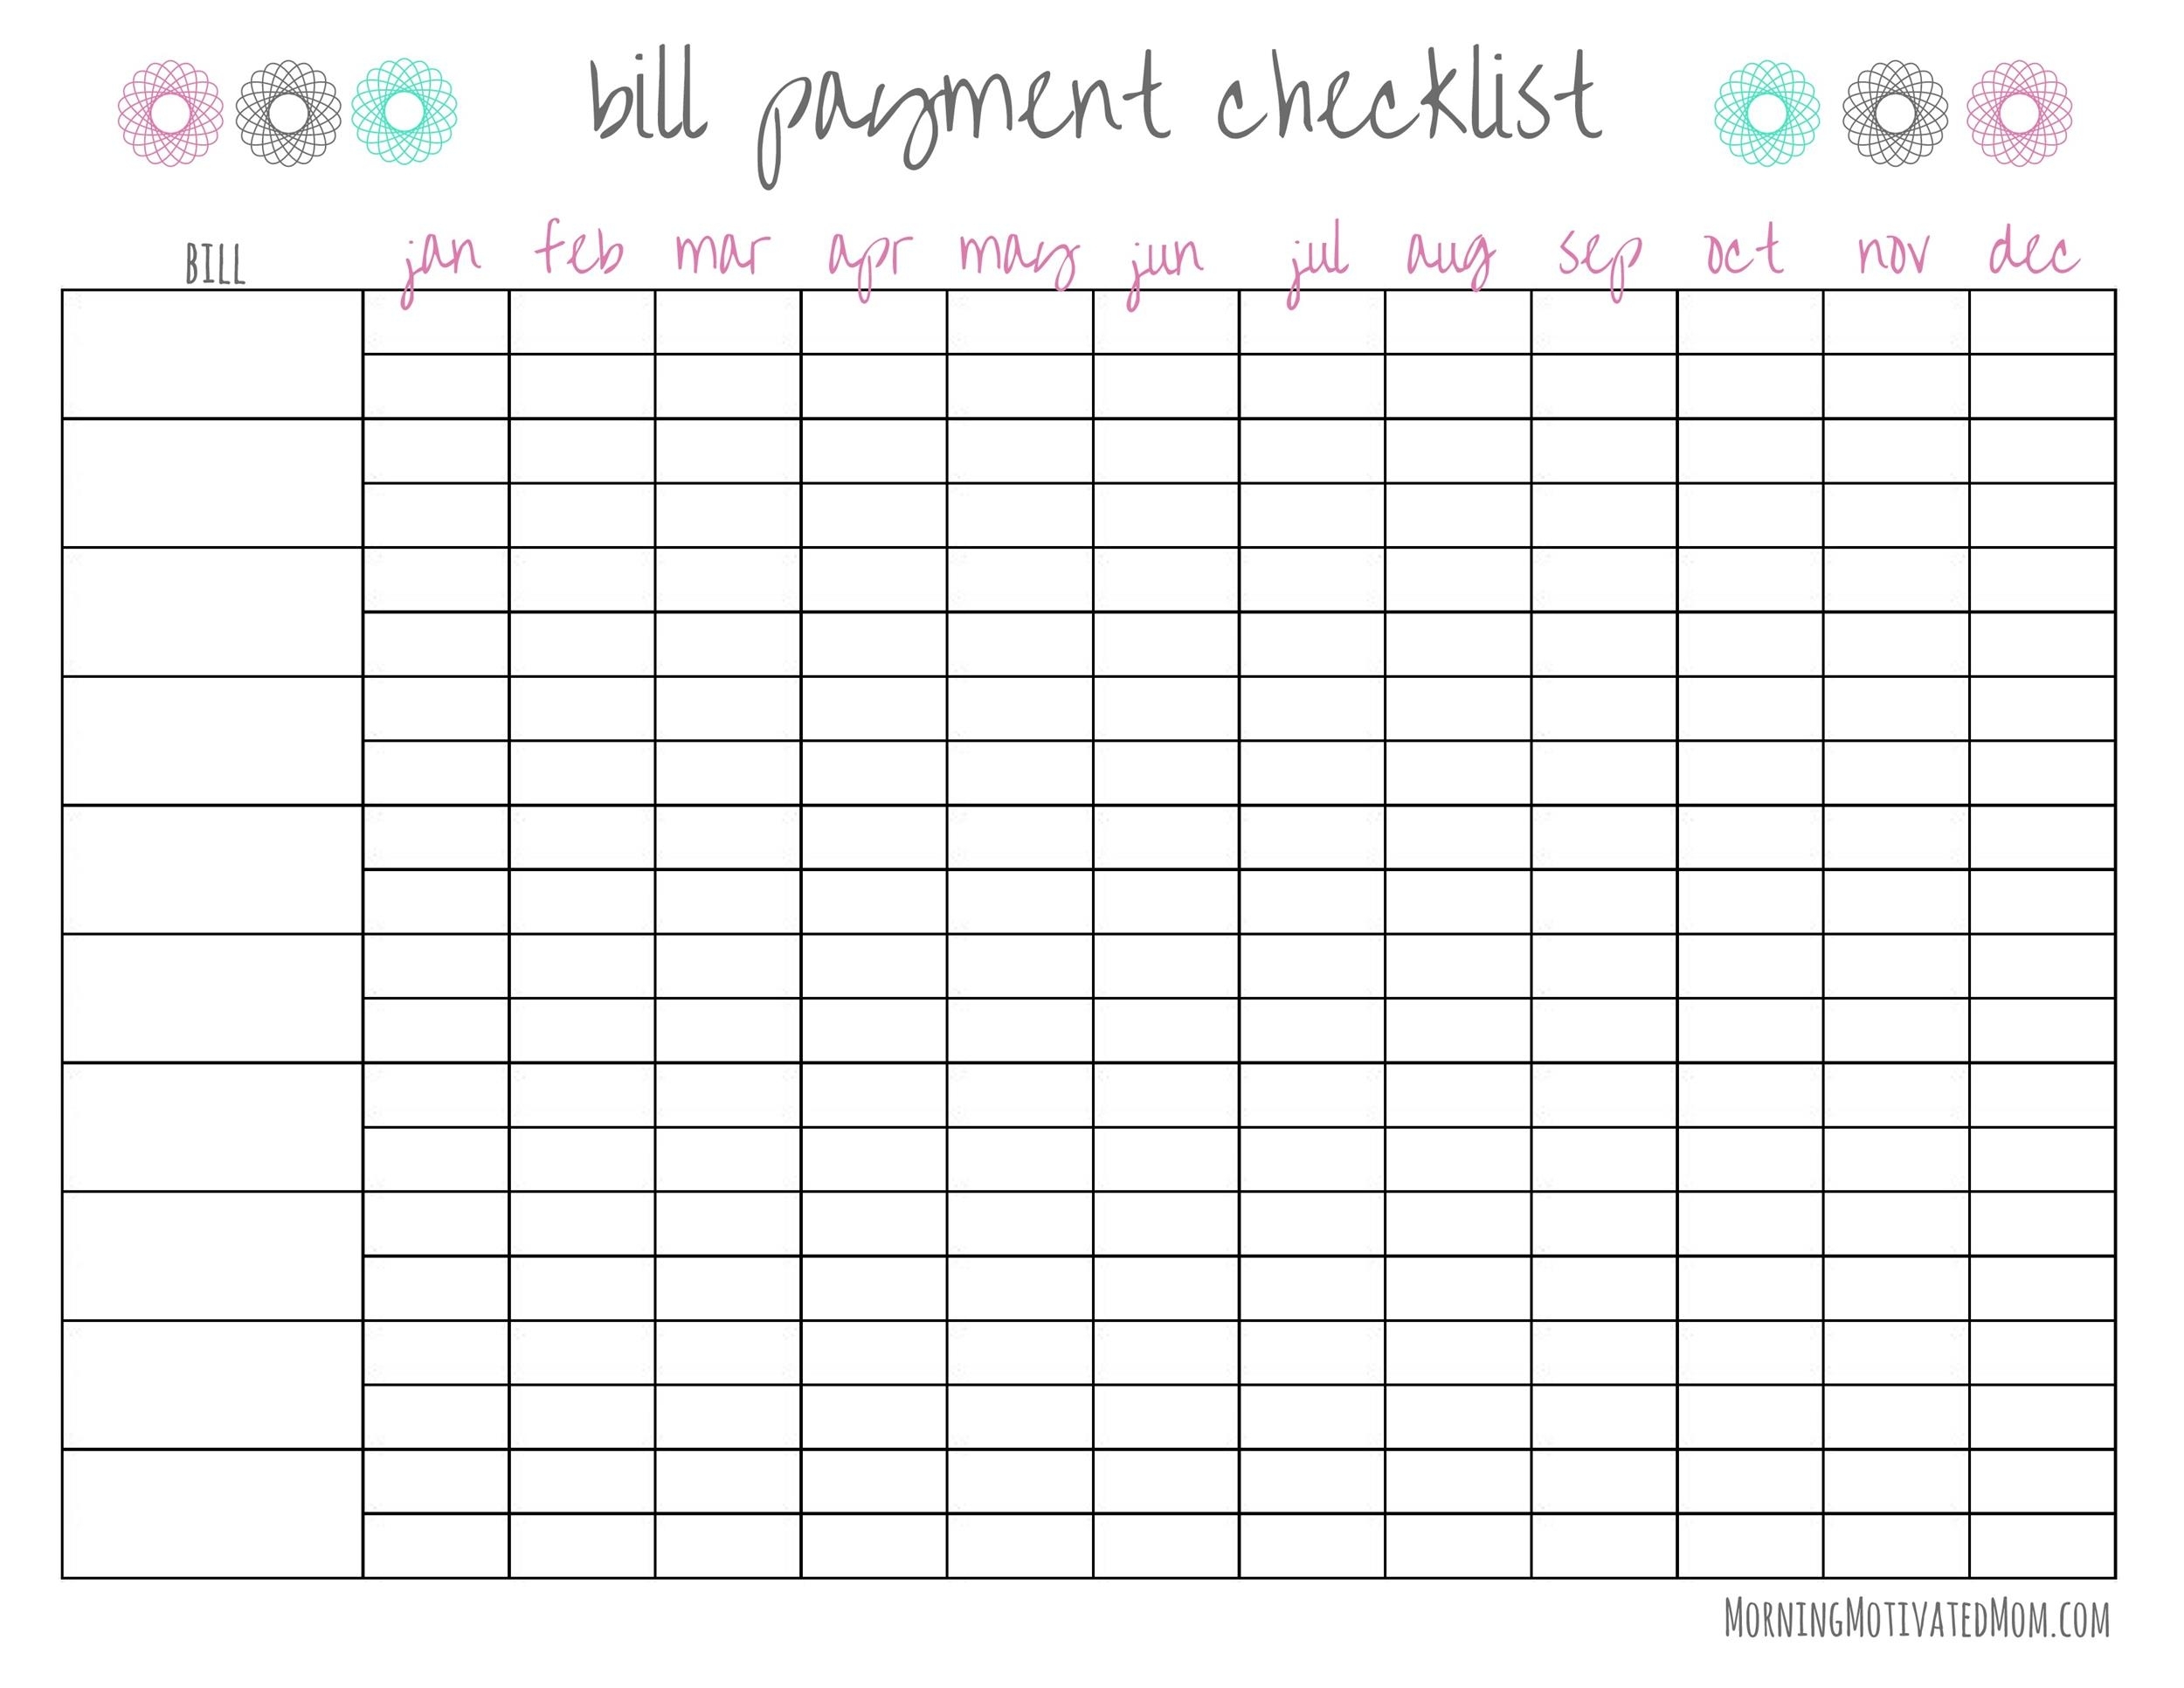 Take Free Printable Payment Checklist Worksheets